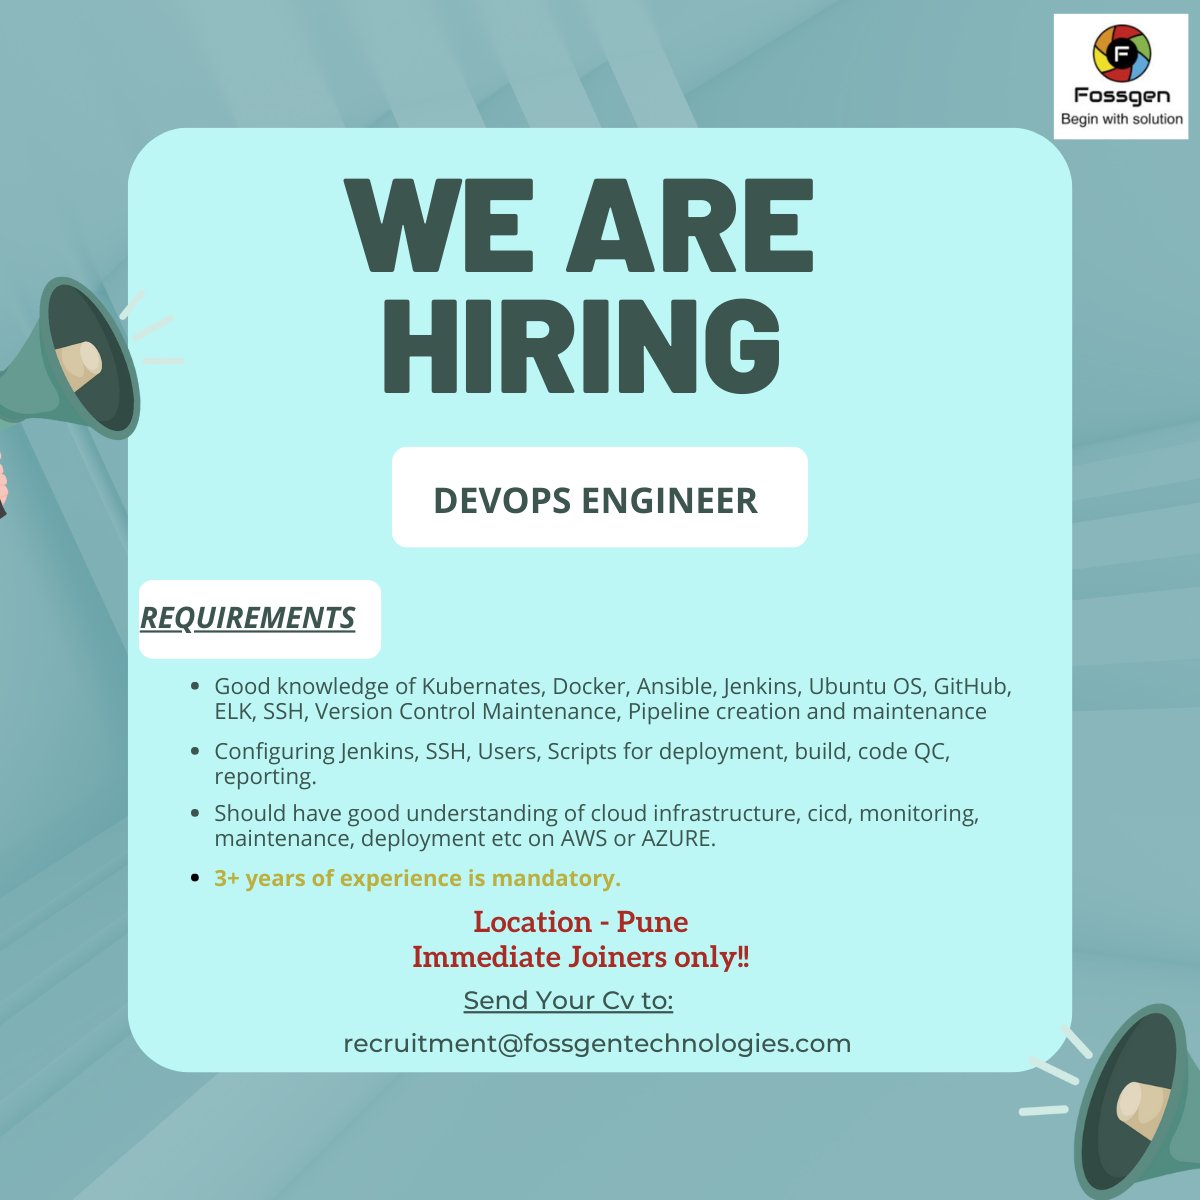 Urgently Looking for DevOps Engineer.
Experience: 3to 5 yrs
Location: Pune
Immediate Joiner required
Interested can mail their resume to recruitment@fossgentechnologies.com
#experience #engineer #devops #immediatejoiner #pune #resume #recruitment